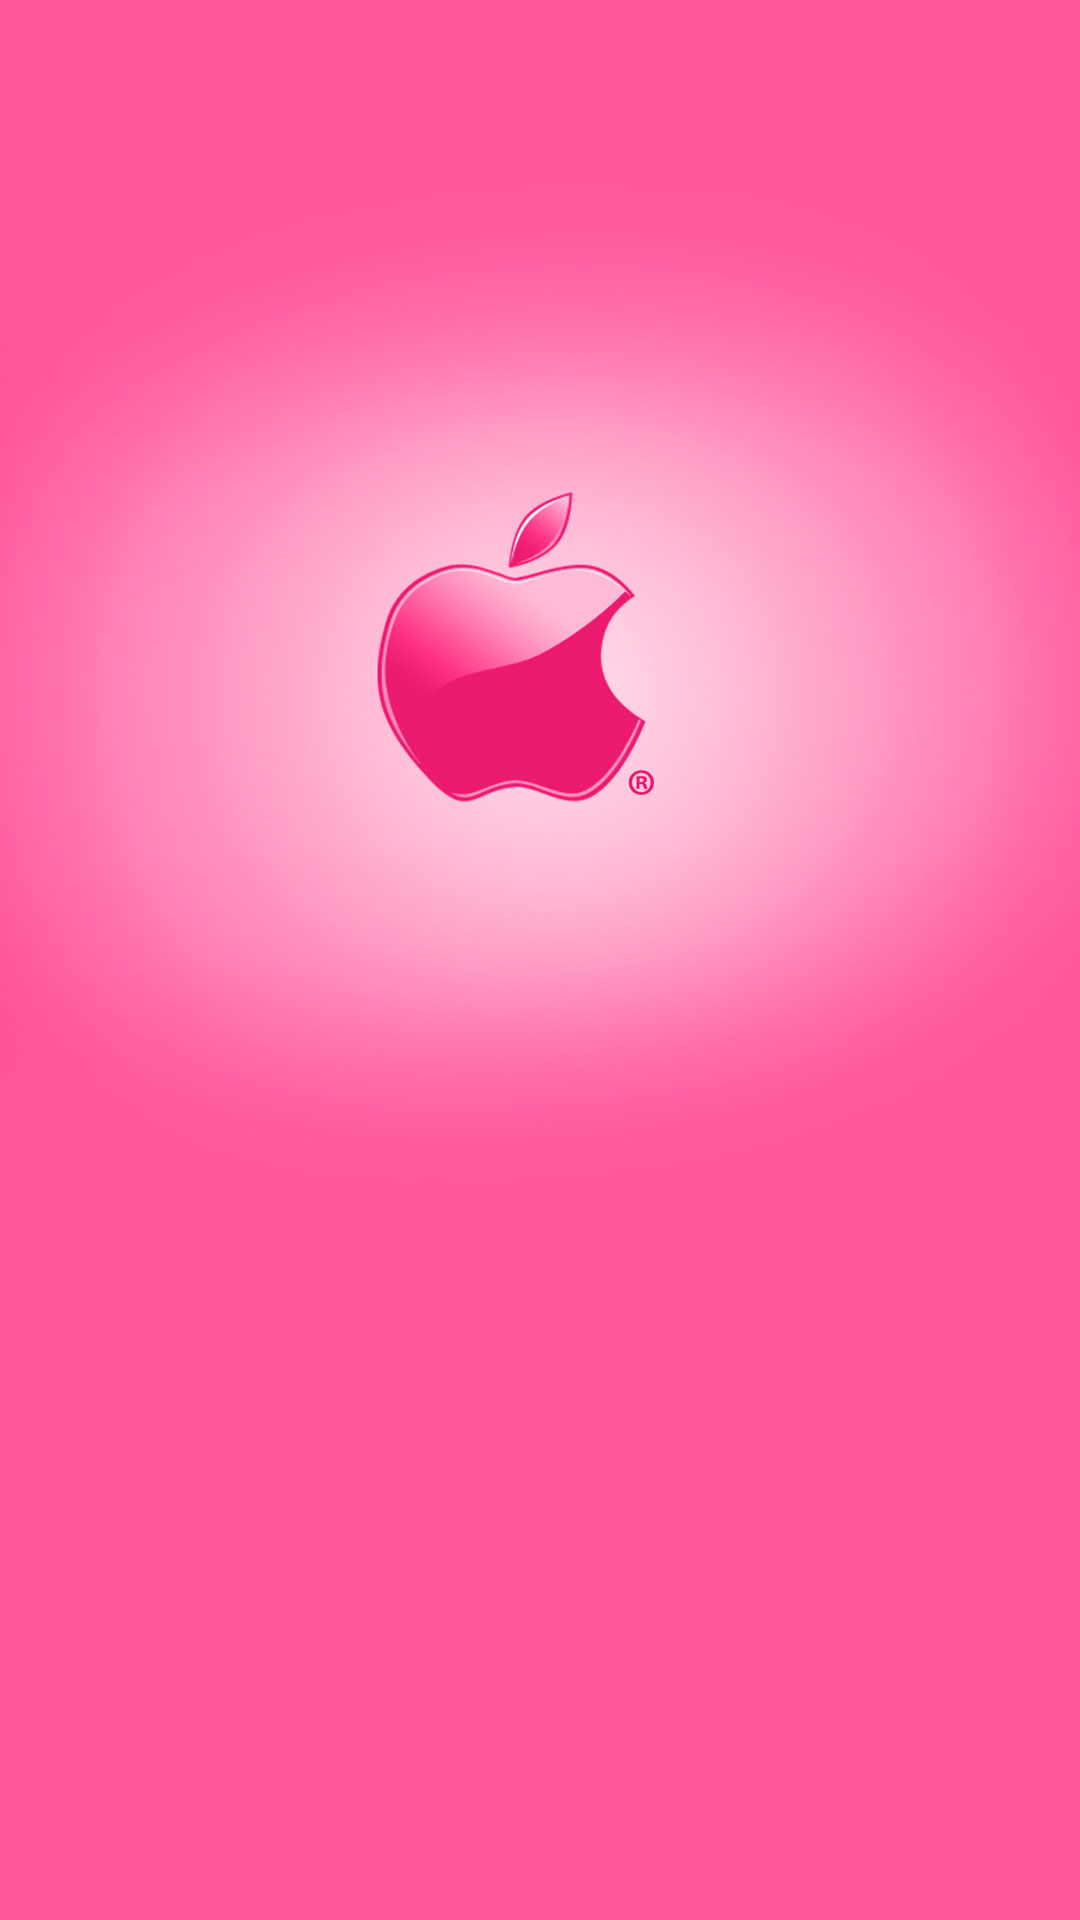 Wallpaper Weekends: In the Pink - Pink iPhone Wallpapers